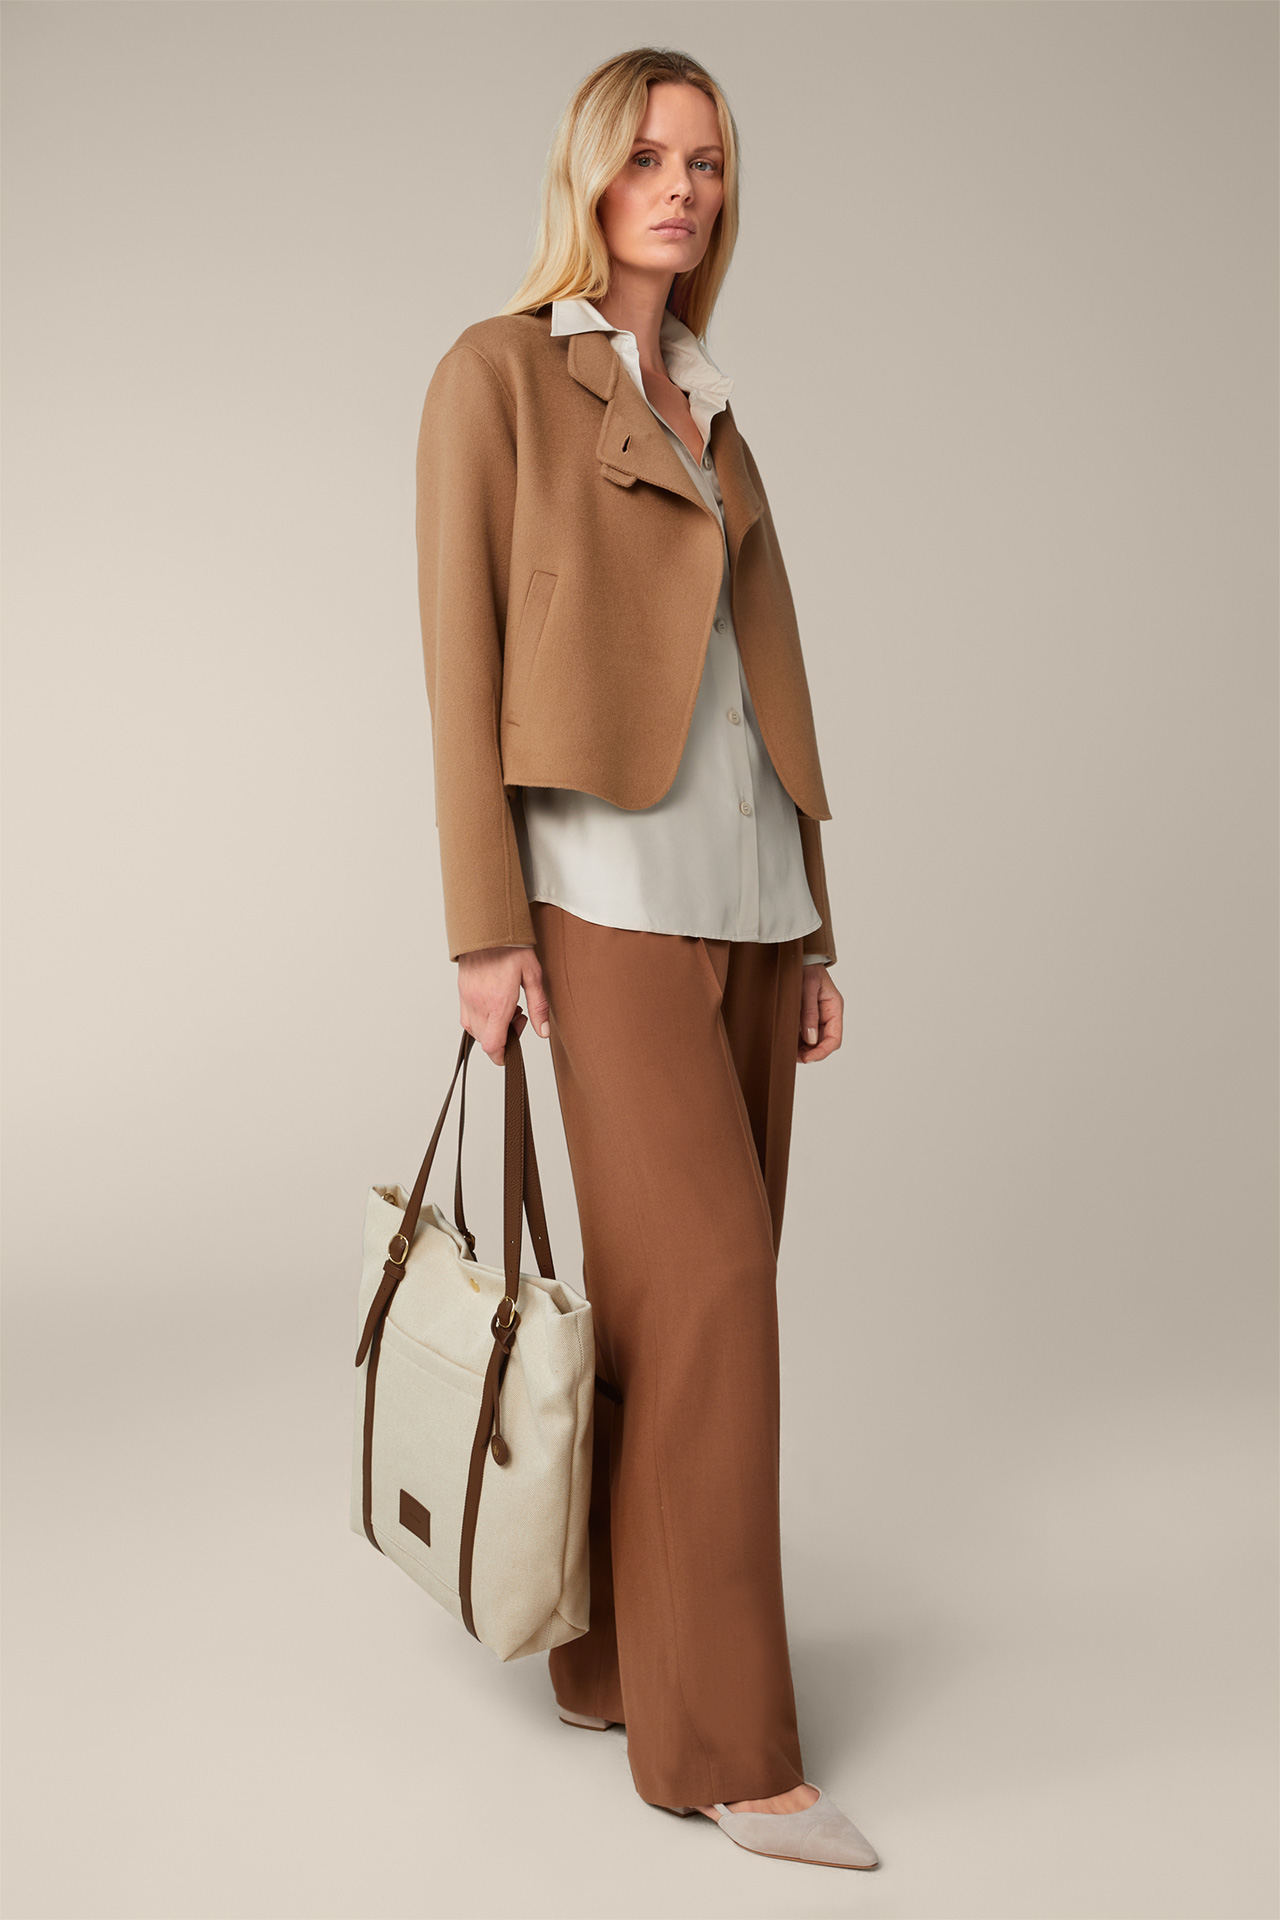 Canvas Shopper with Leather Details in Light Beige